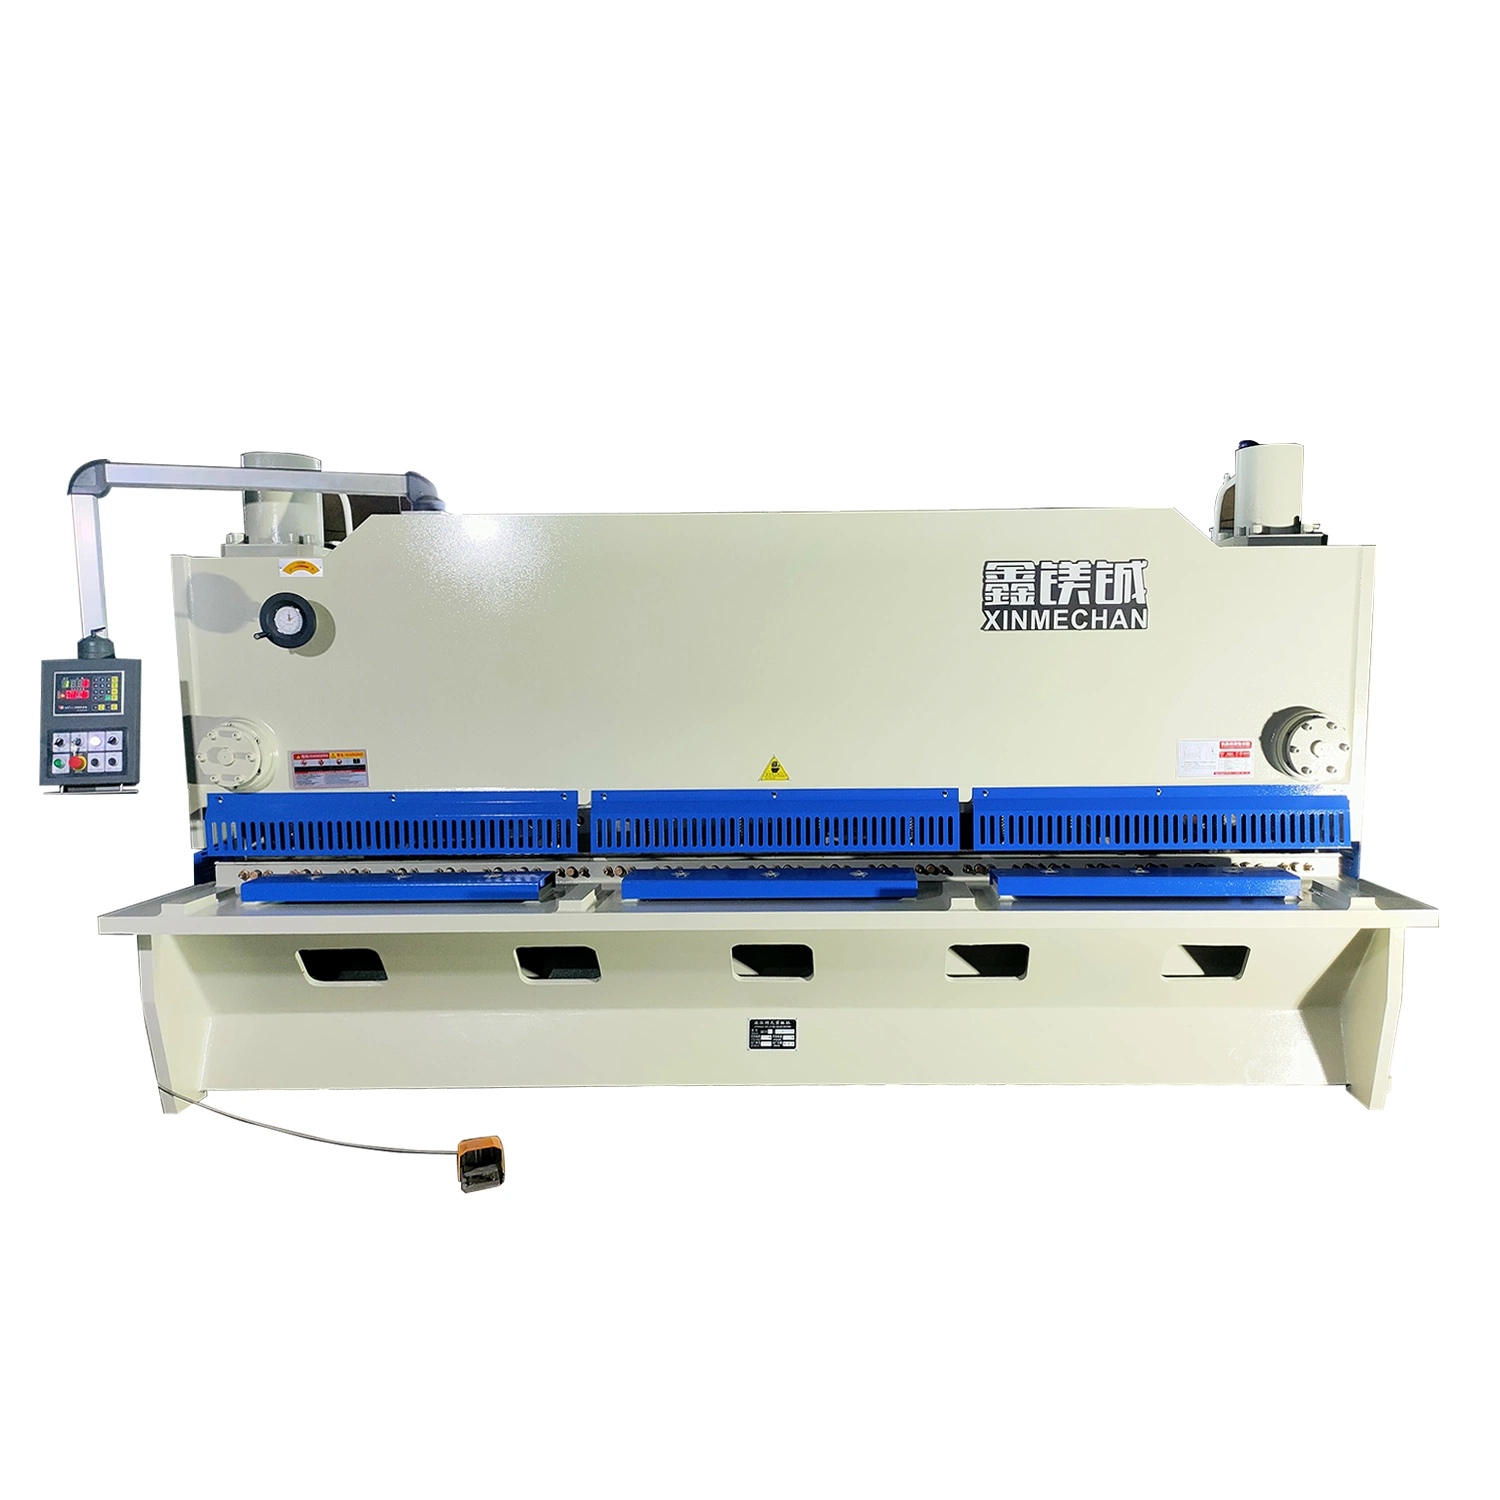 CNC Guillotine Hydraulic Press Cut Machine for Shearing 25thick Aluminum Alloy Steel Plate Sheet